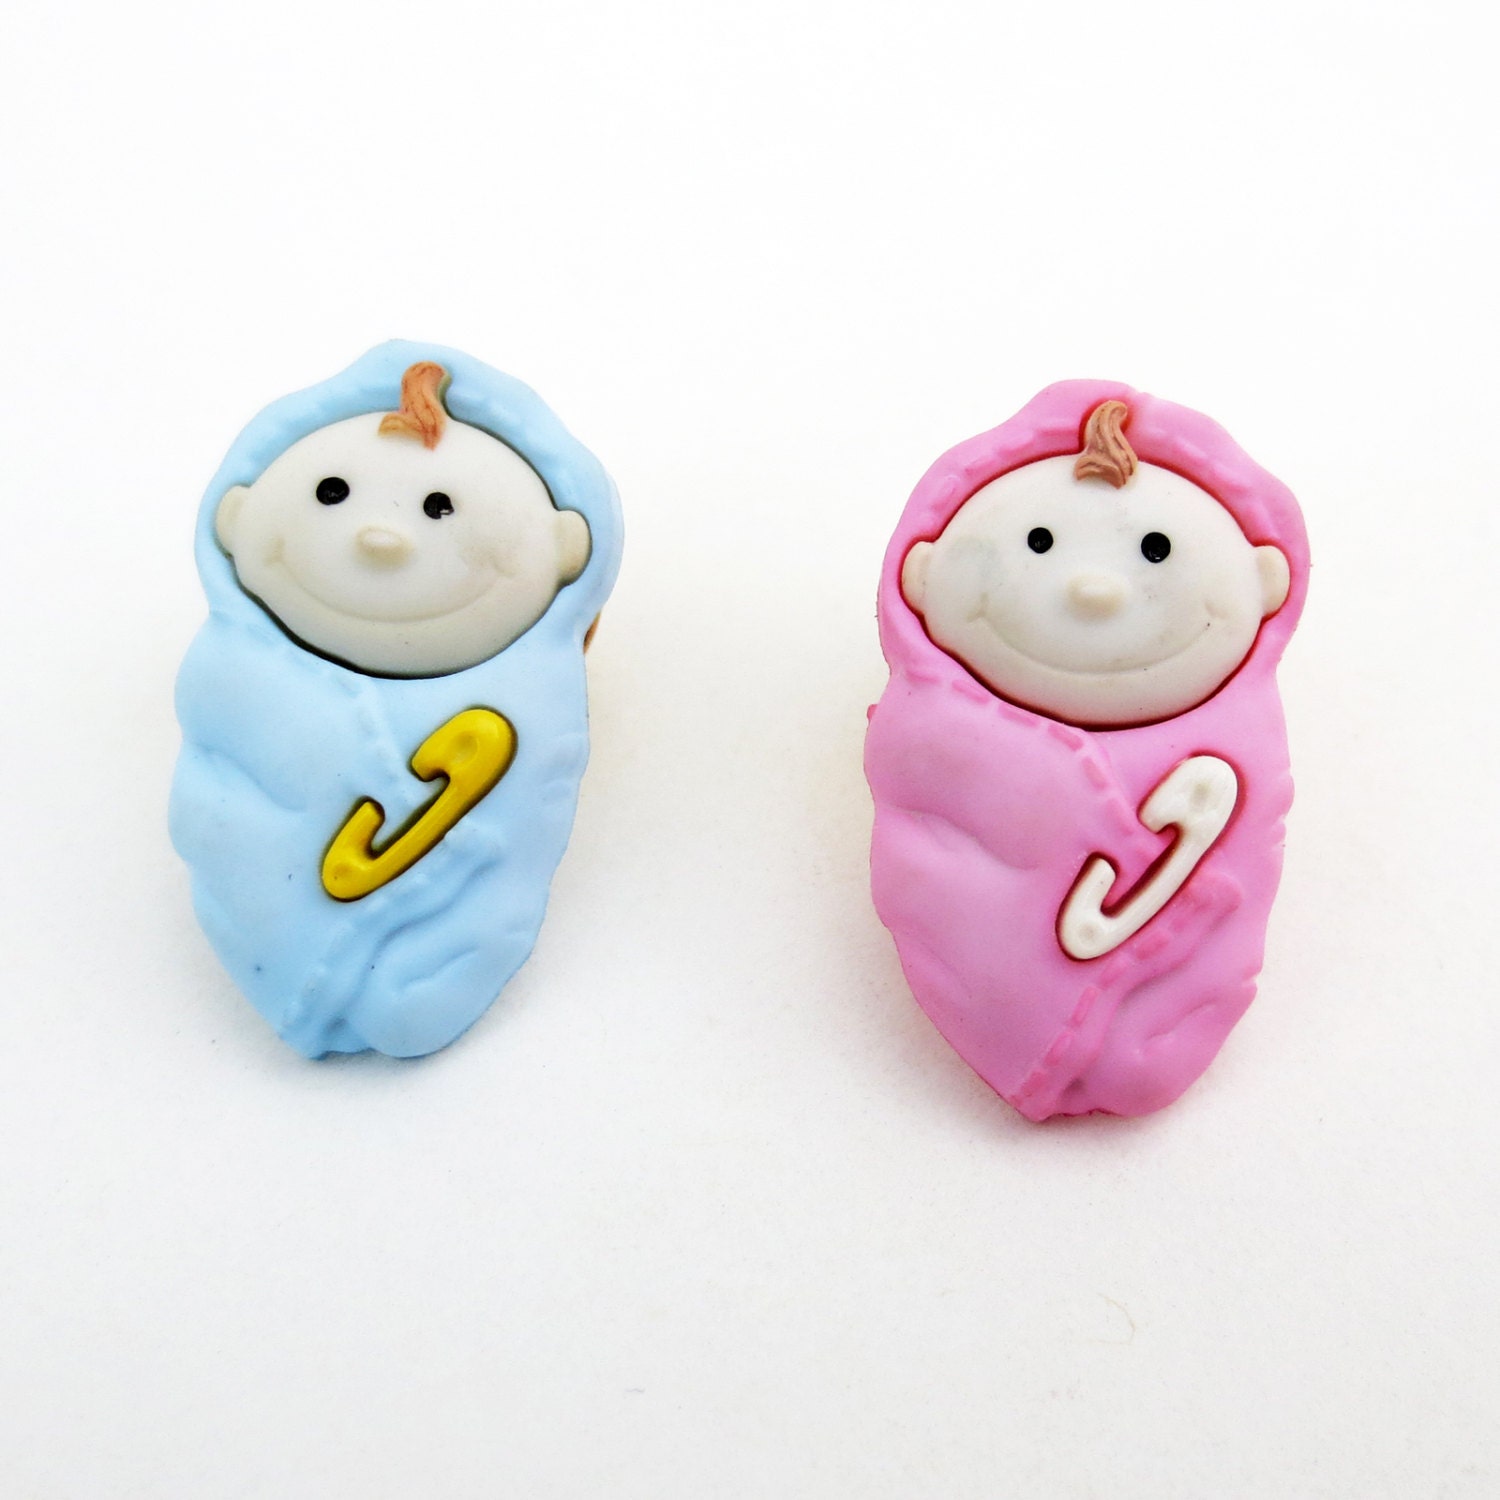 Baby Boy Baby Girl Pin Brooch Free Shipping Gender Reveal Pink Blue Bundle of Joy Pregnancy Mom to Be Baby Shower Gift - CathysUniqueCreation